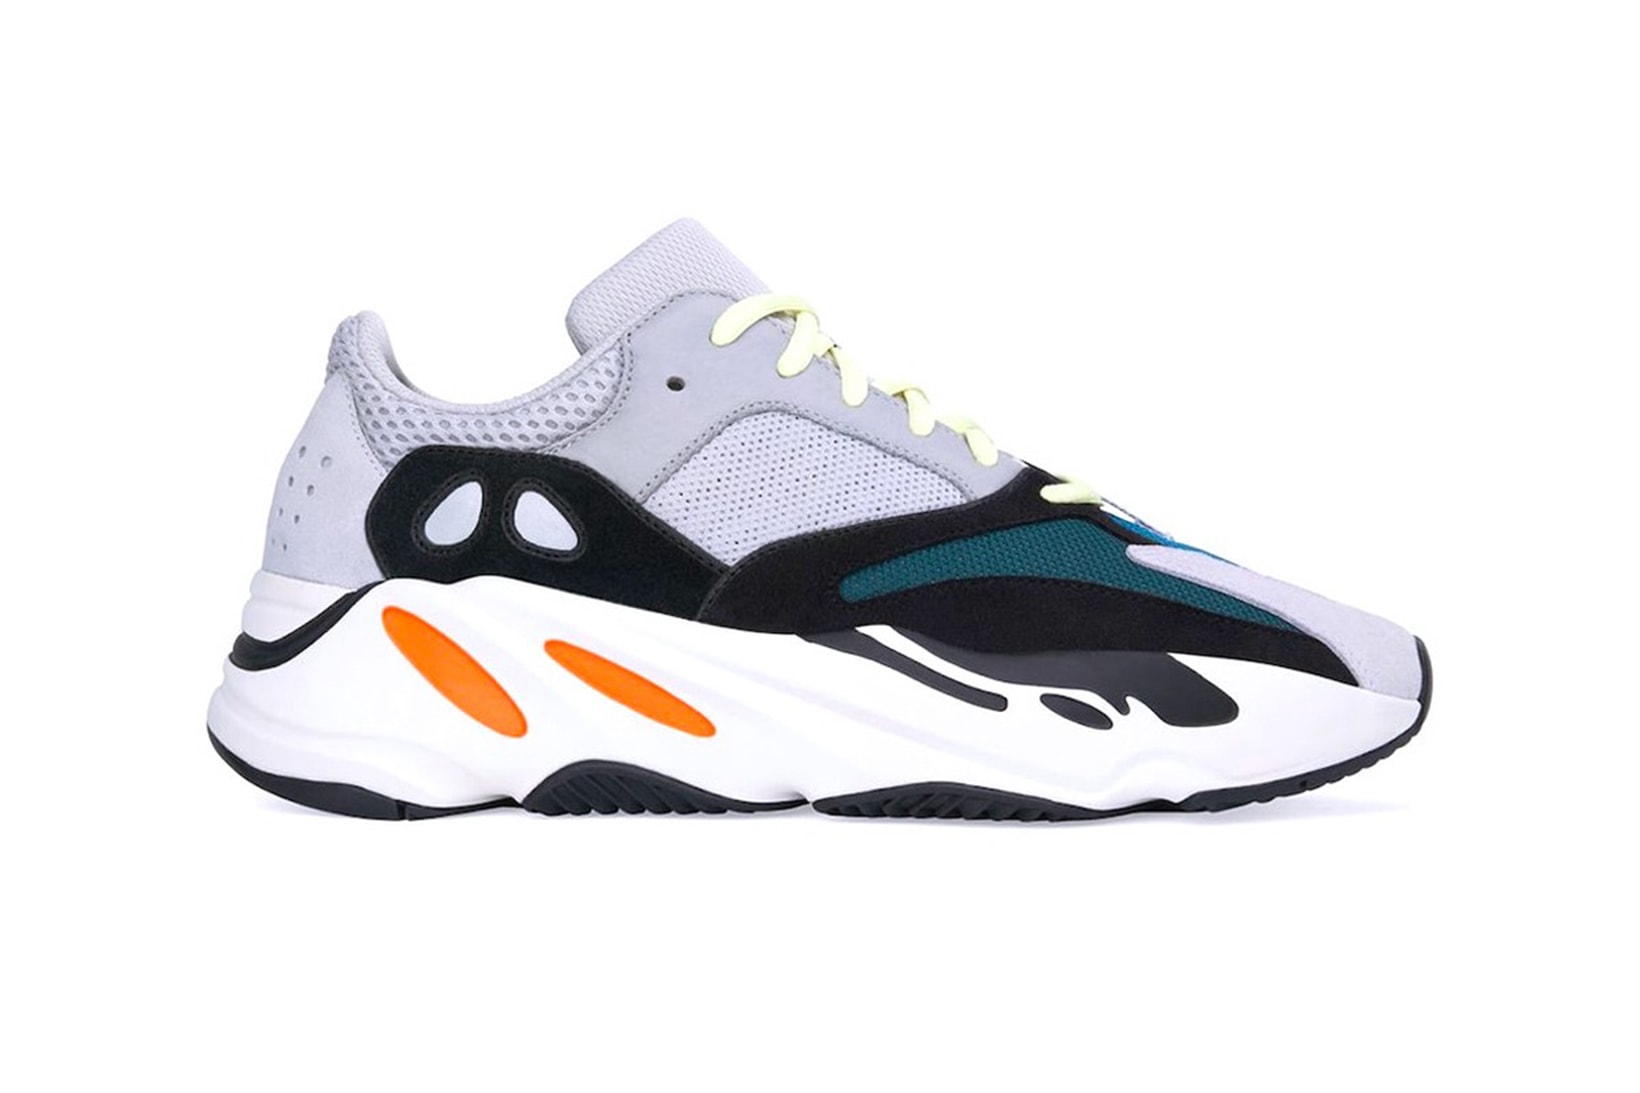 adidas YEEZY BOOST 700 "Wave Runner" Re-Release Solid Gray Chalk White Core Black Lateral View